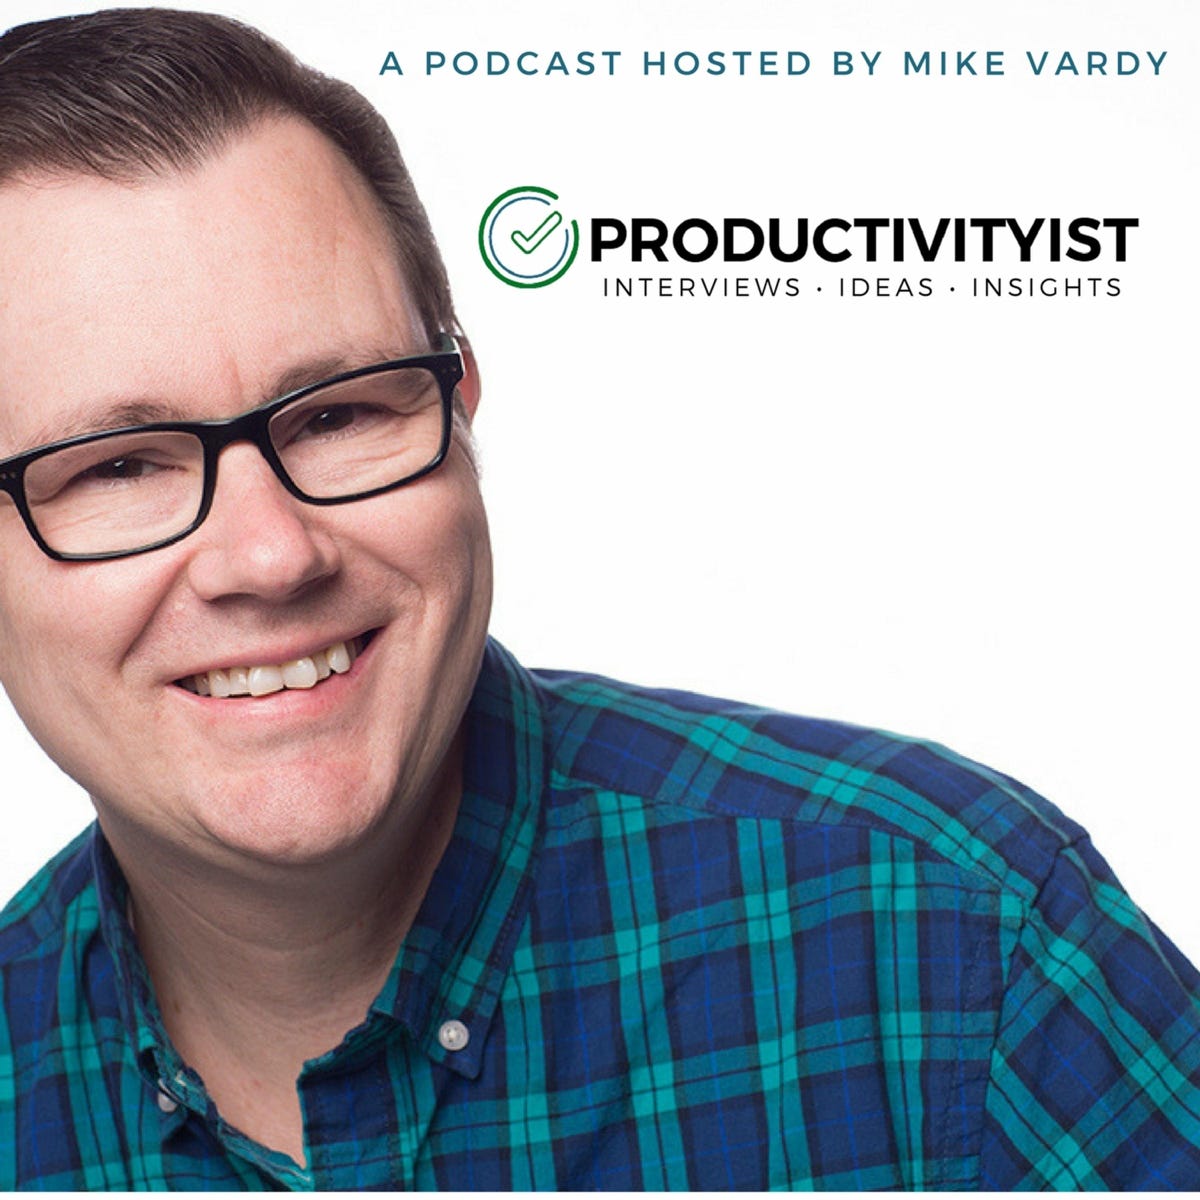 The Productivityist Podcast: Ideas and Tools for Personal Productivity |  Time Management | Goals | Habits | Working Better Podcast | Podyssey